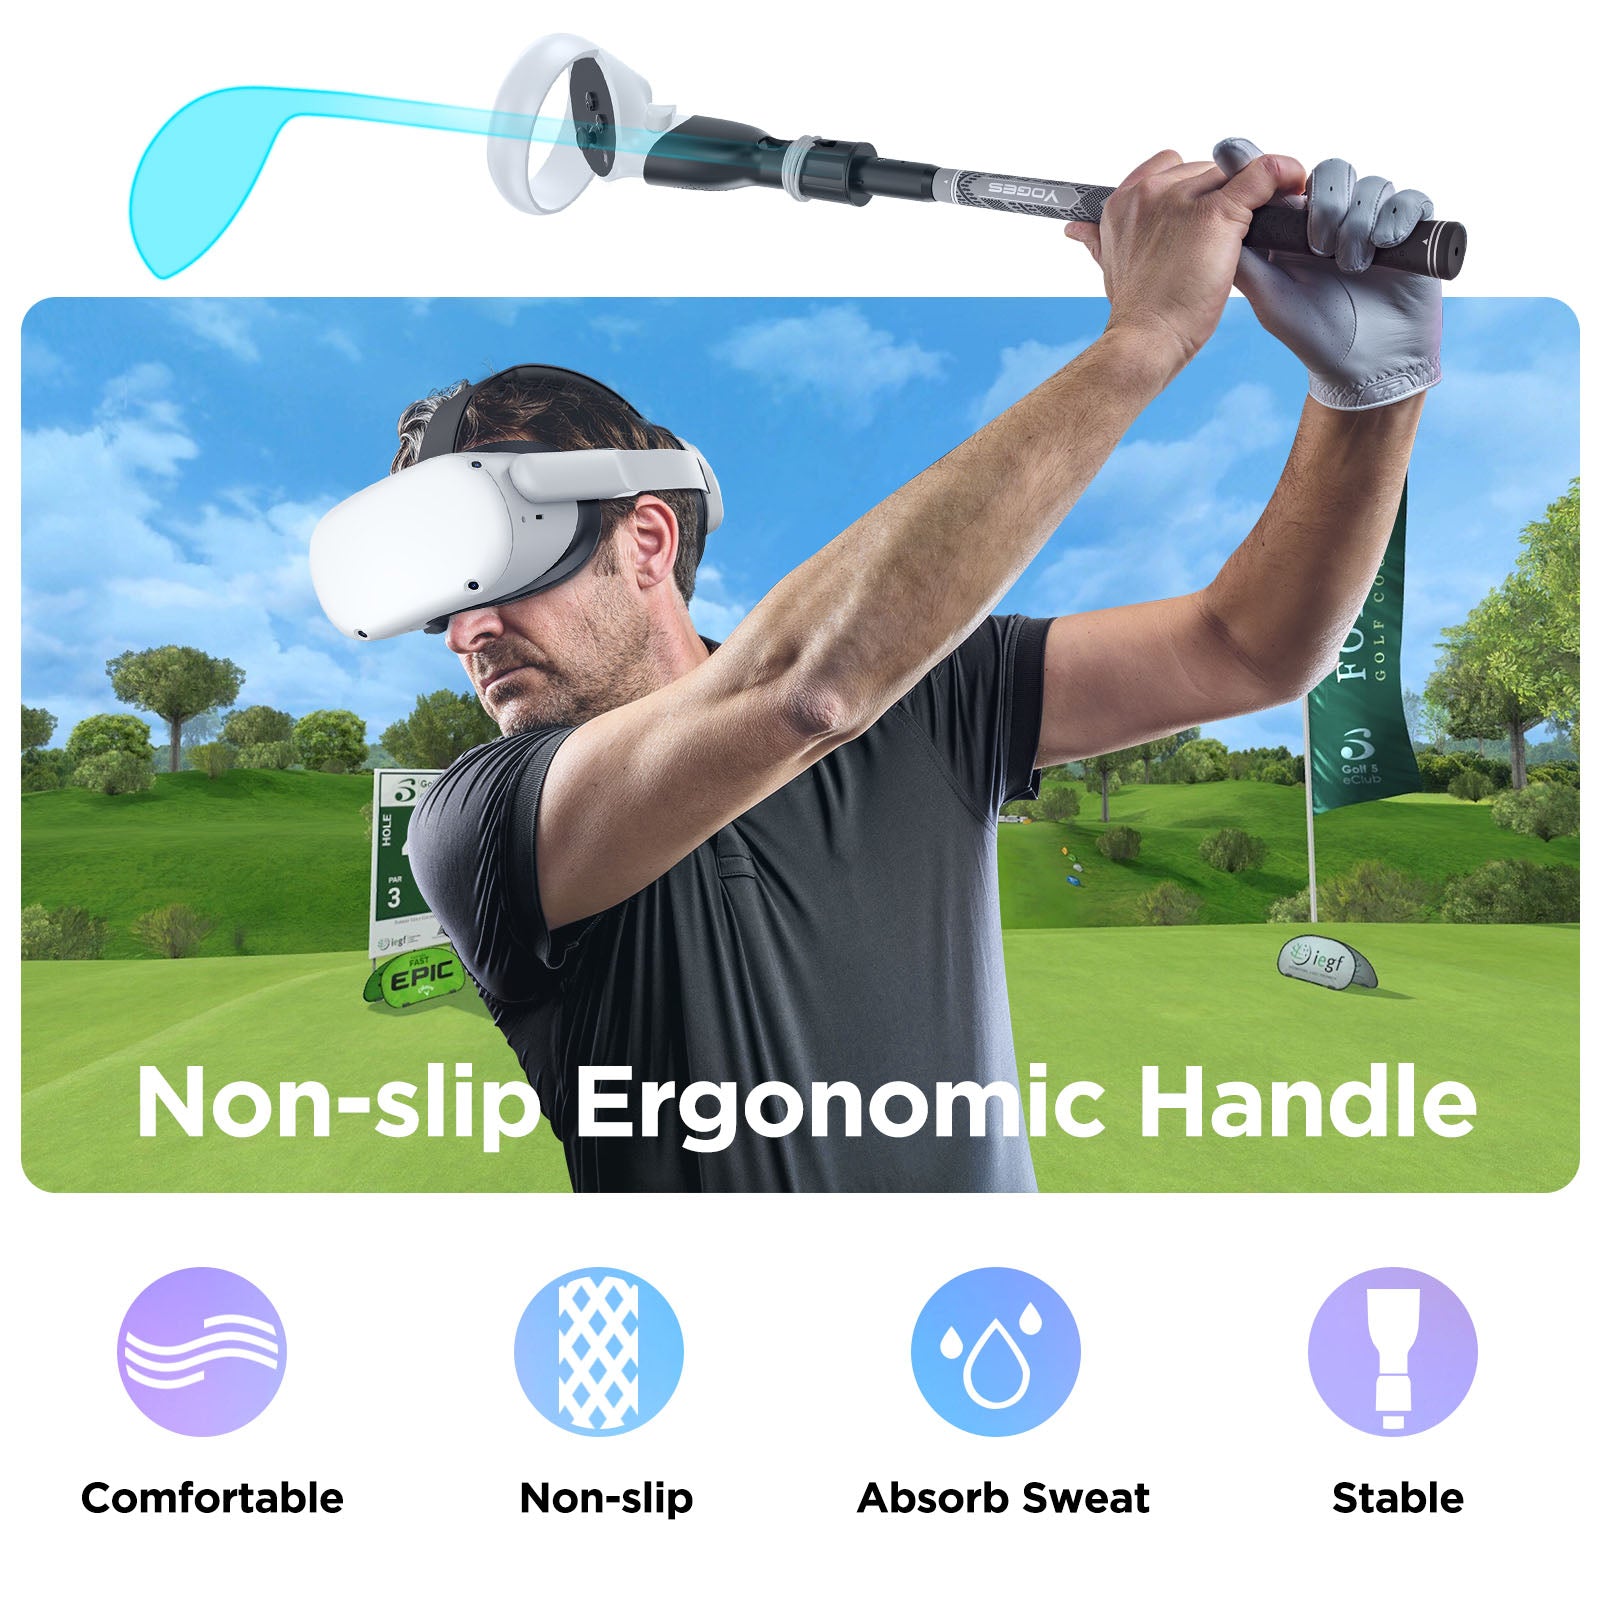 YOGES VR Q10 Golf Handle Attachment Compatible with Meta Oculus Quest 2 Controller